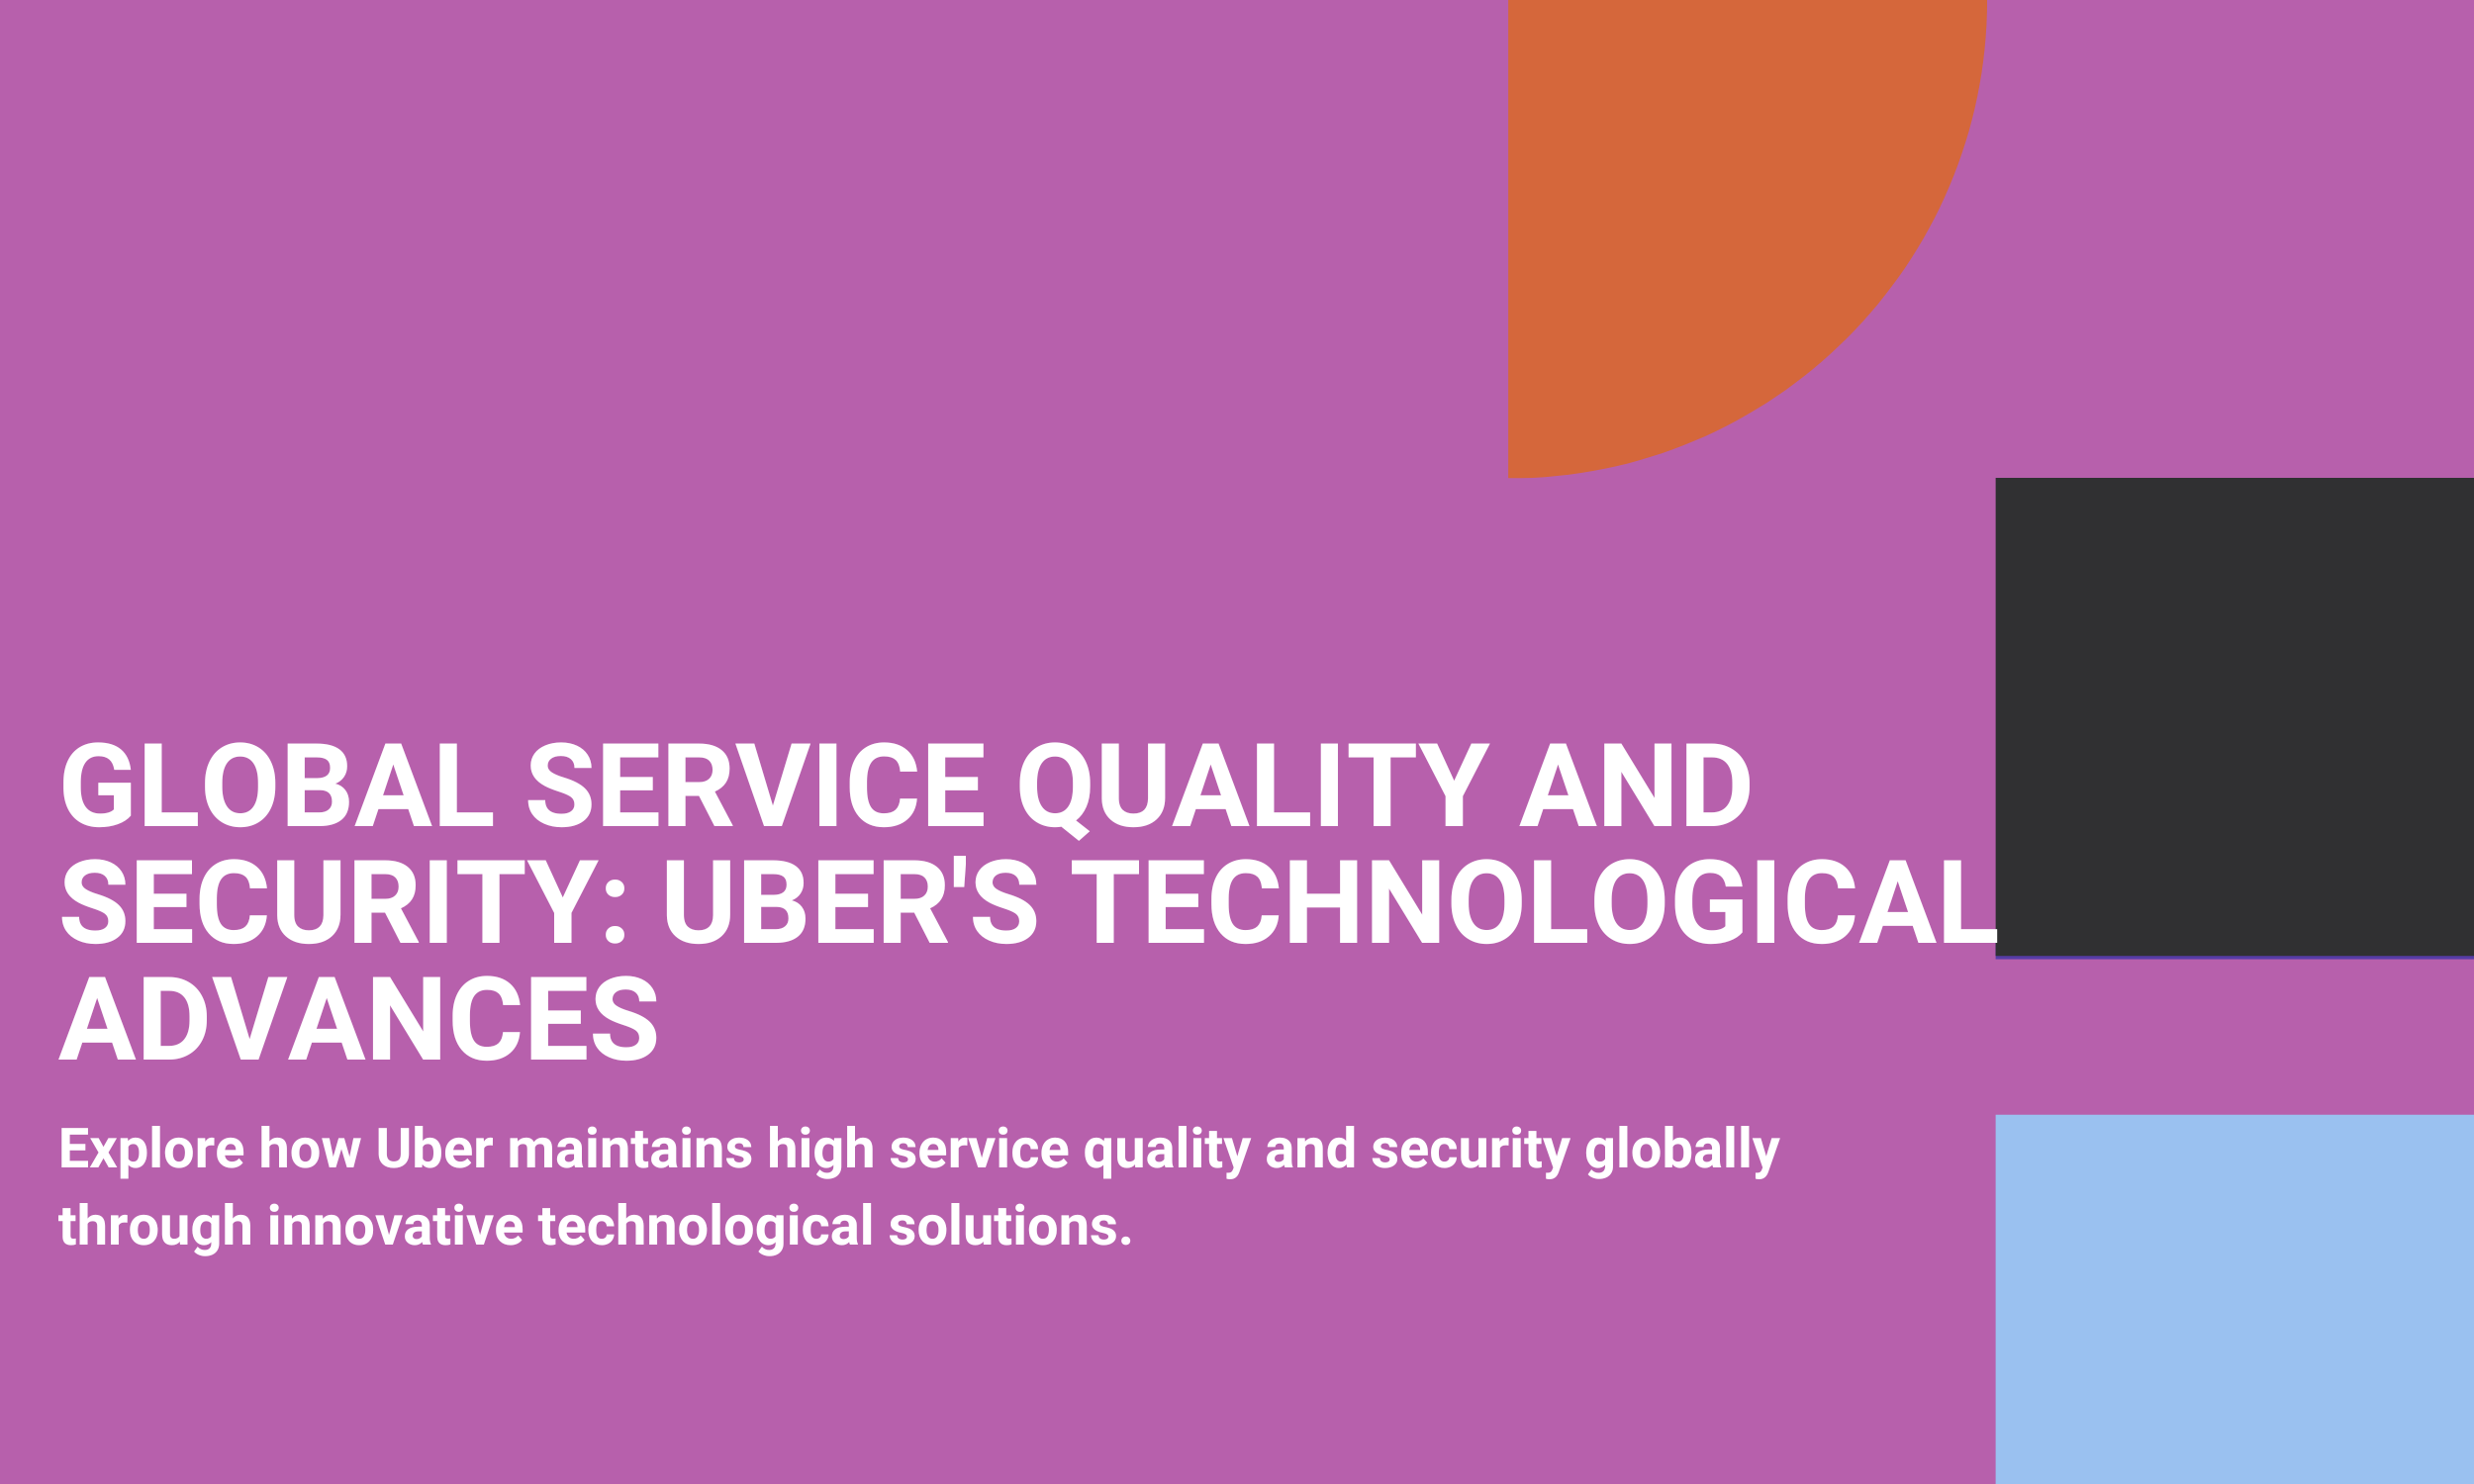 Global Service Quality and Security: Uber's Technological Advances